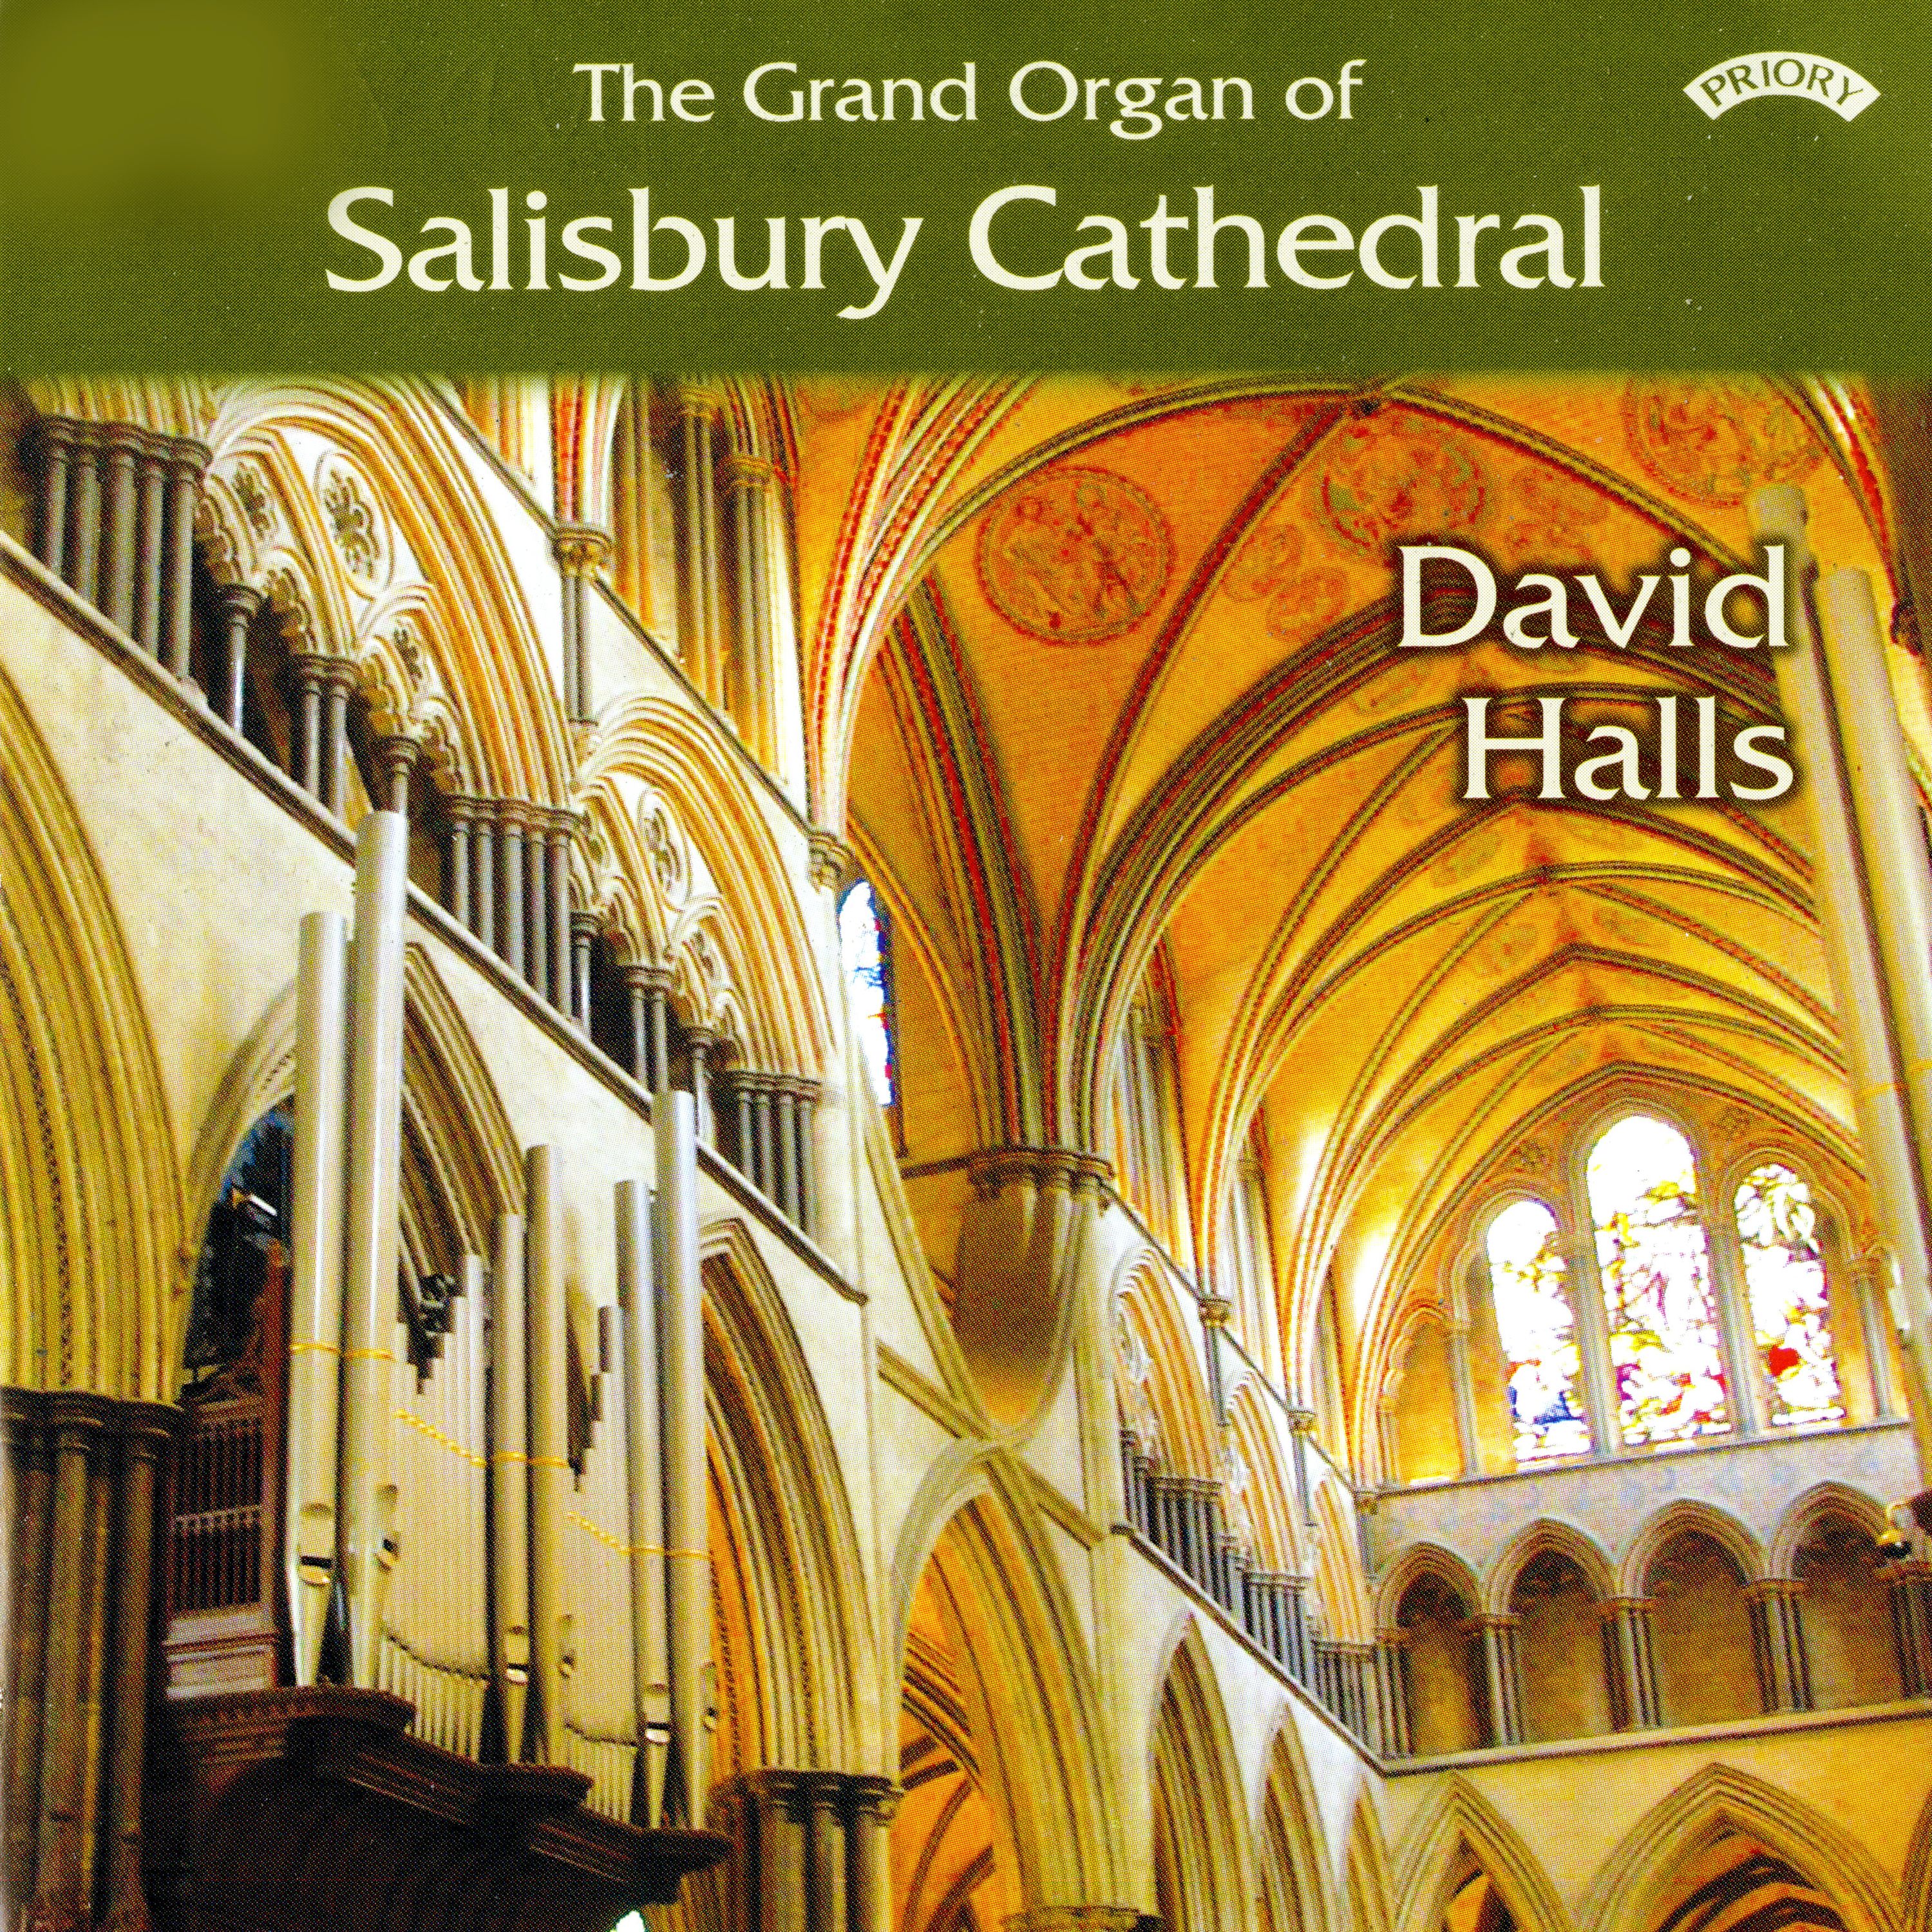 The Grand Organ of Salisbury Cathedral